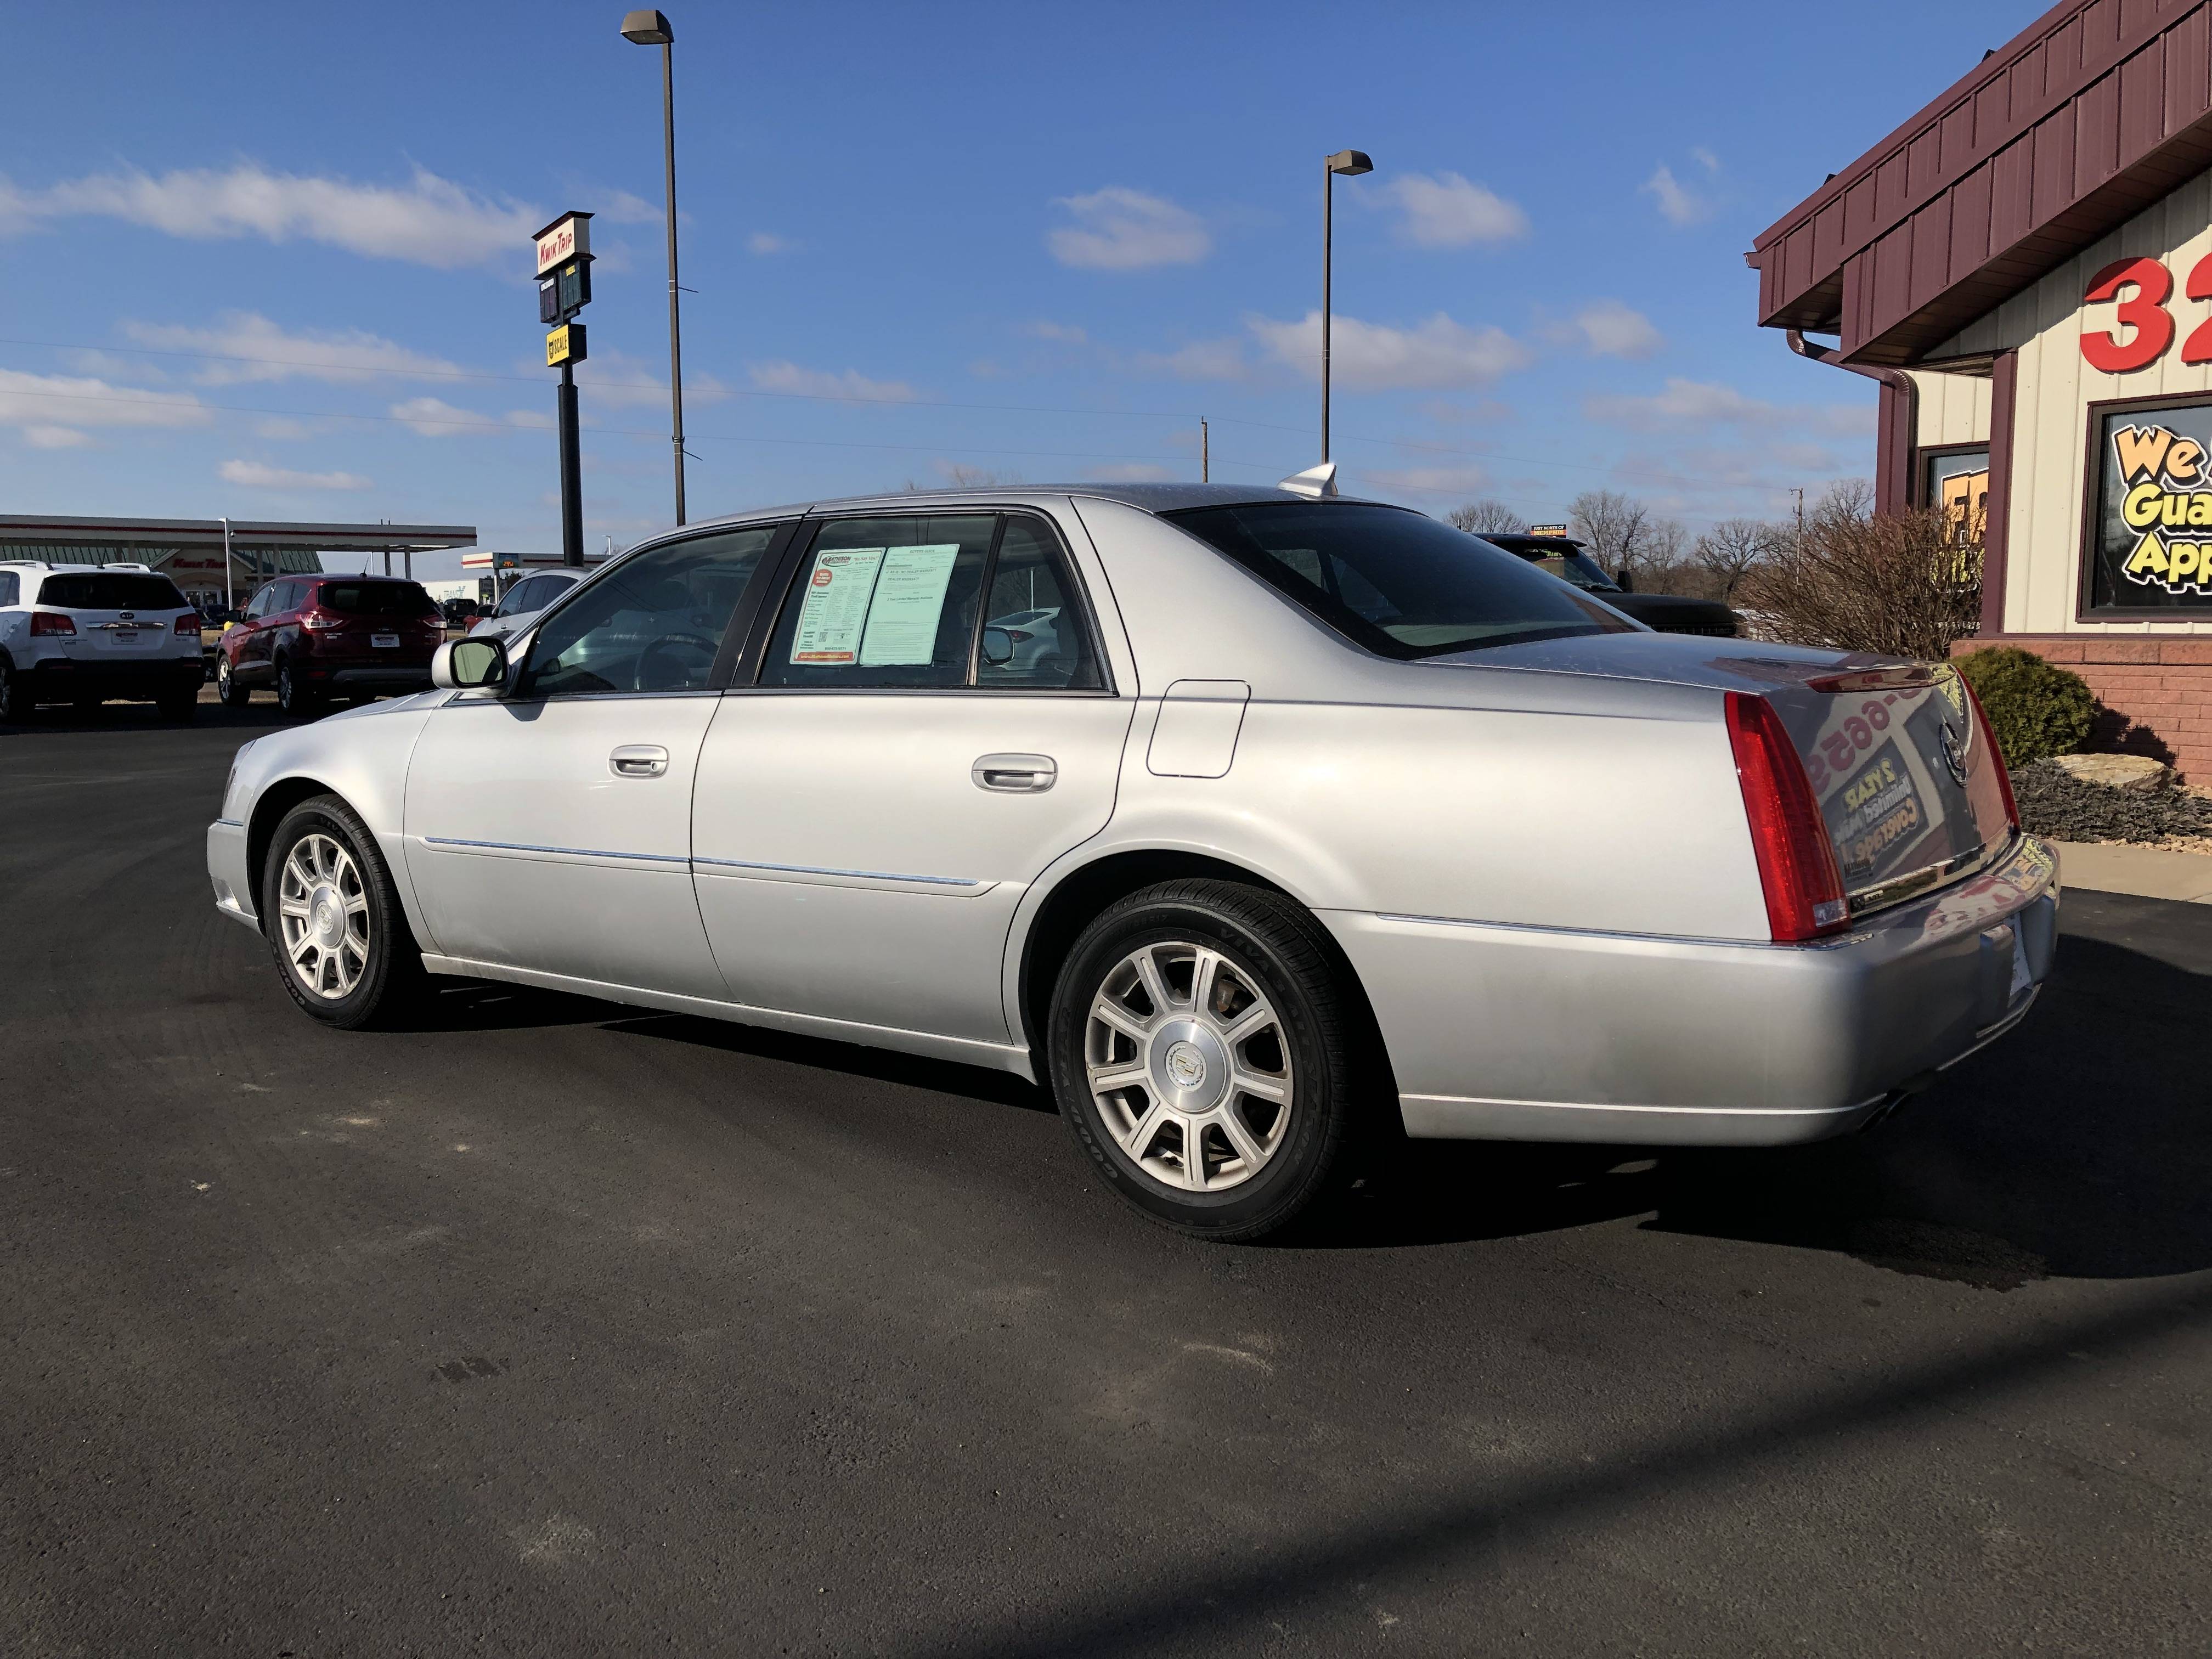 Used 2010 Cadillac DTS for sale in MATHISON | 22296 | JP Motors Inc DBA ...